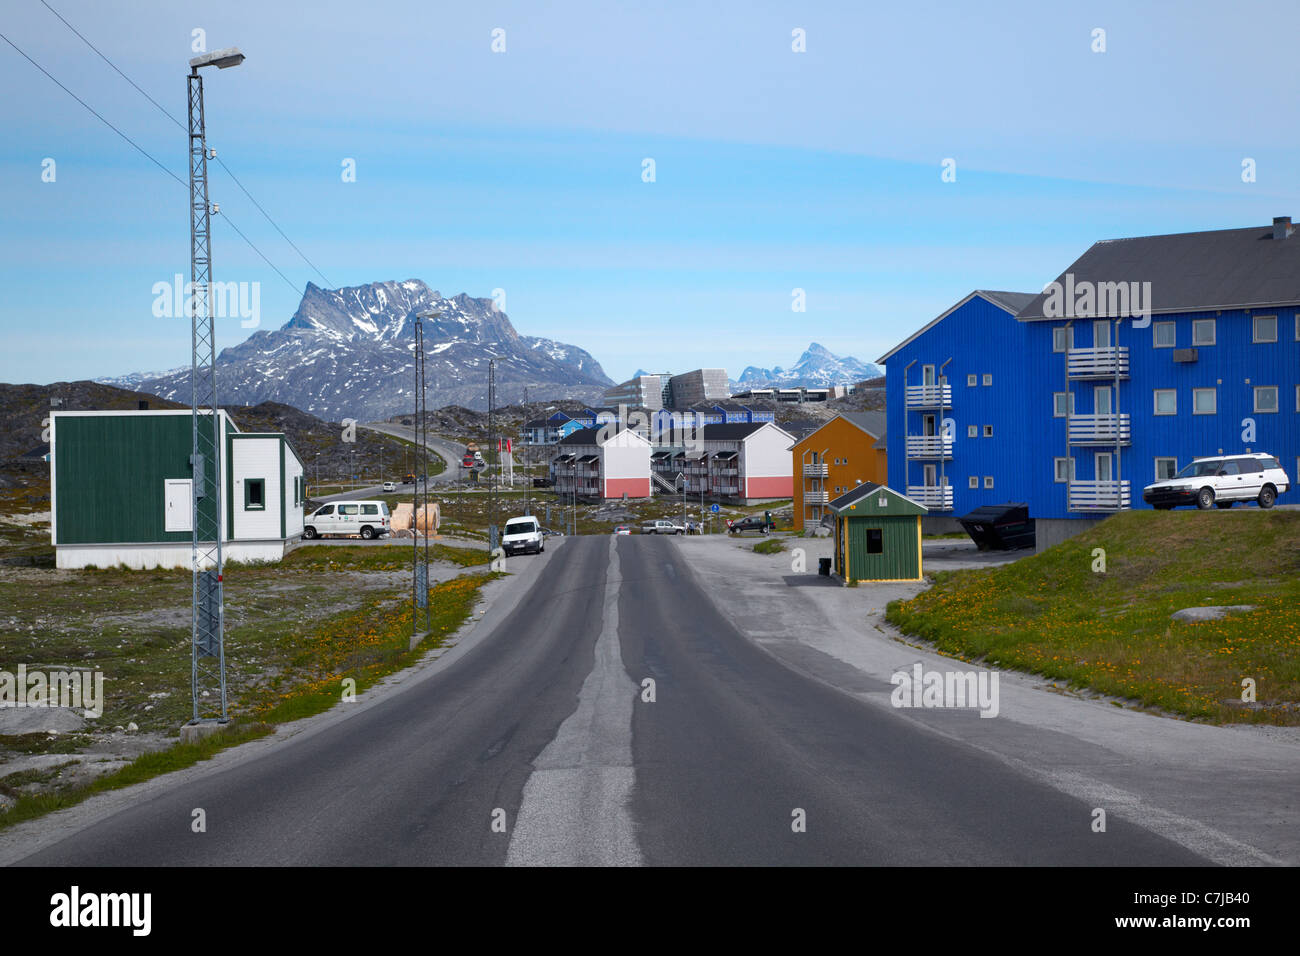 Siaqqinneq Street, Nuuk, Groenland Banque D'Images